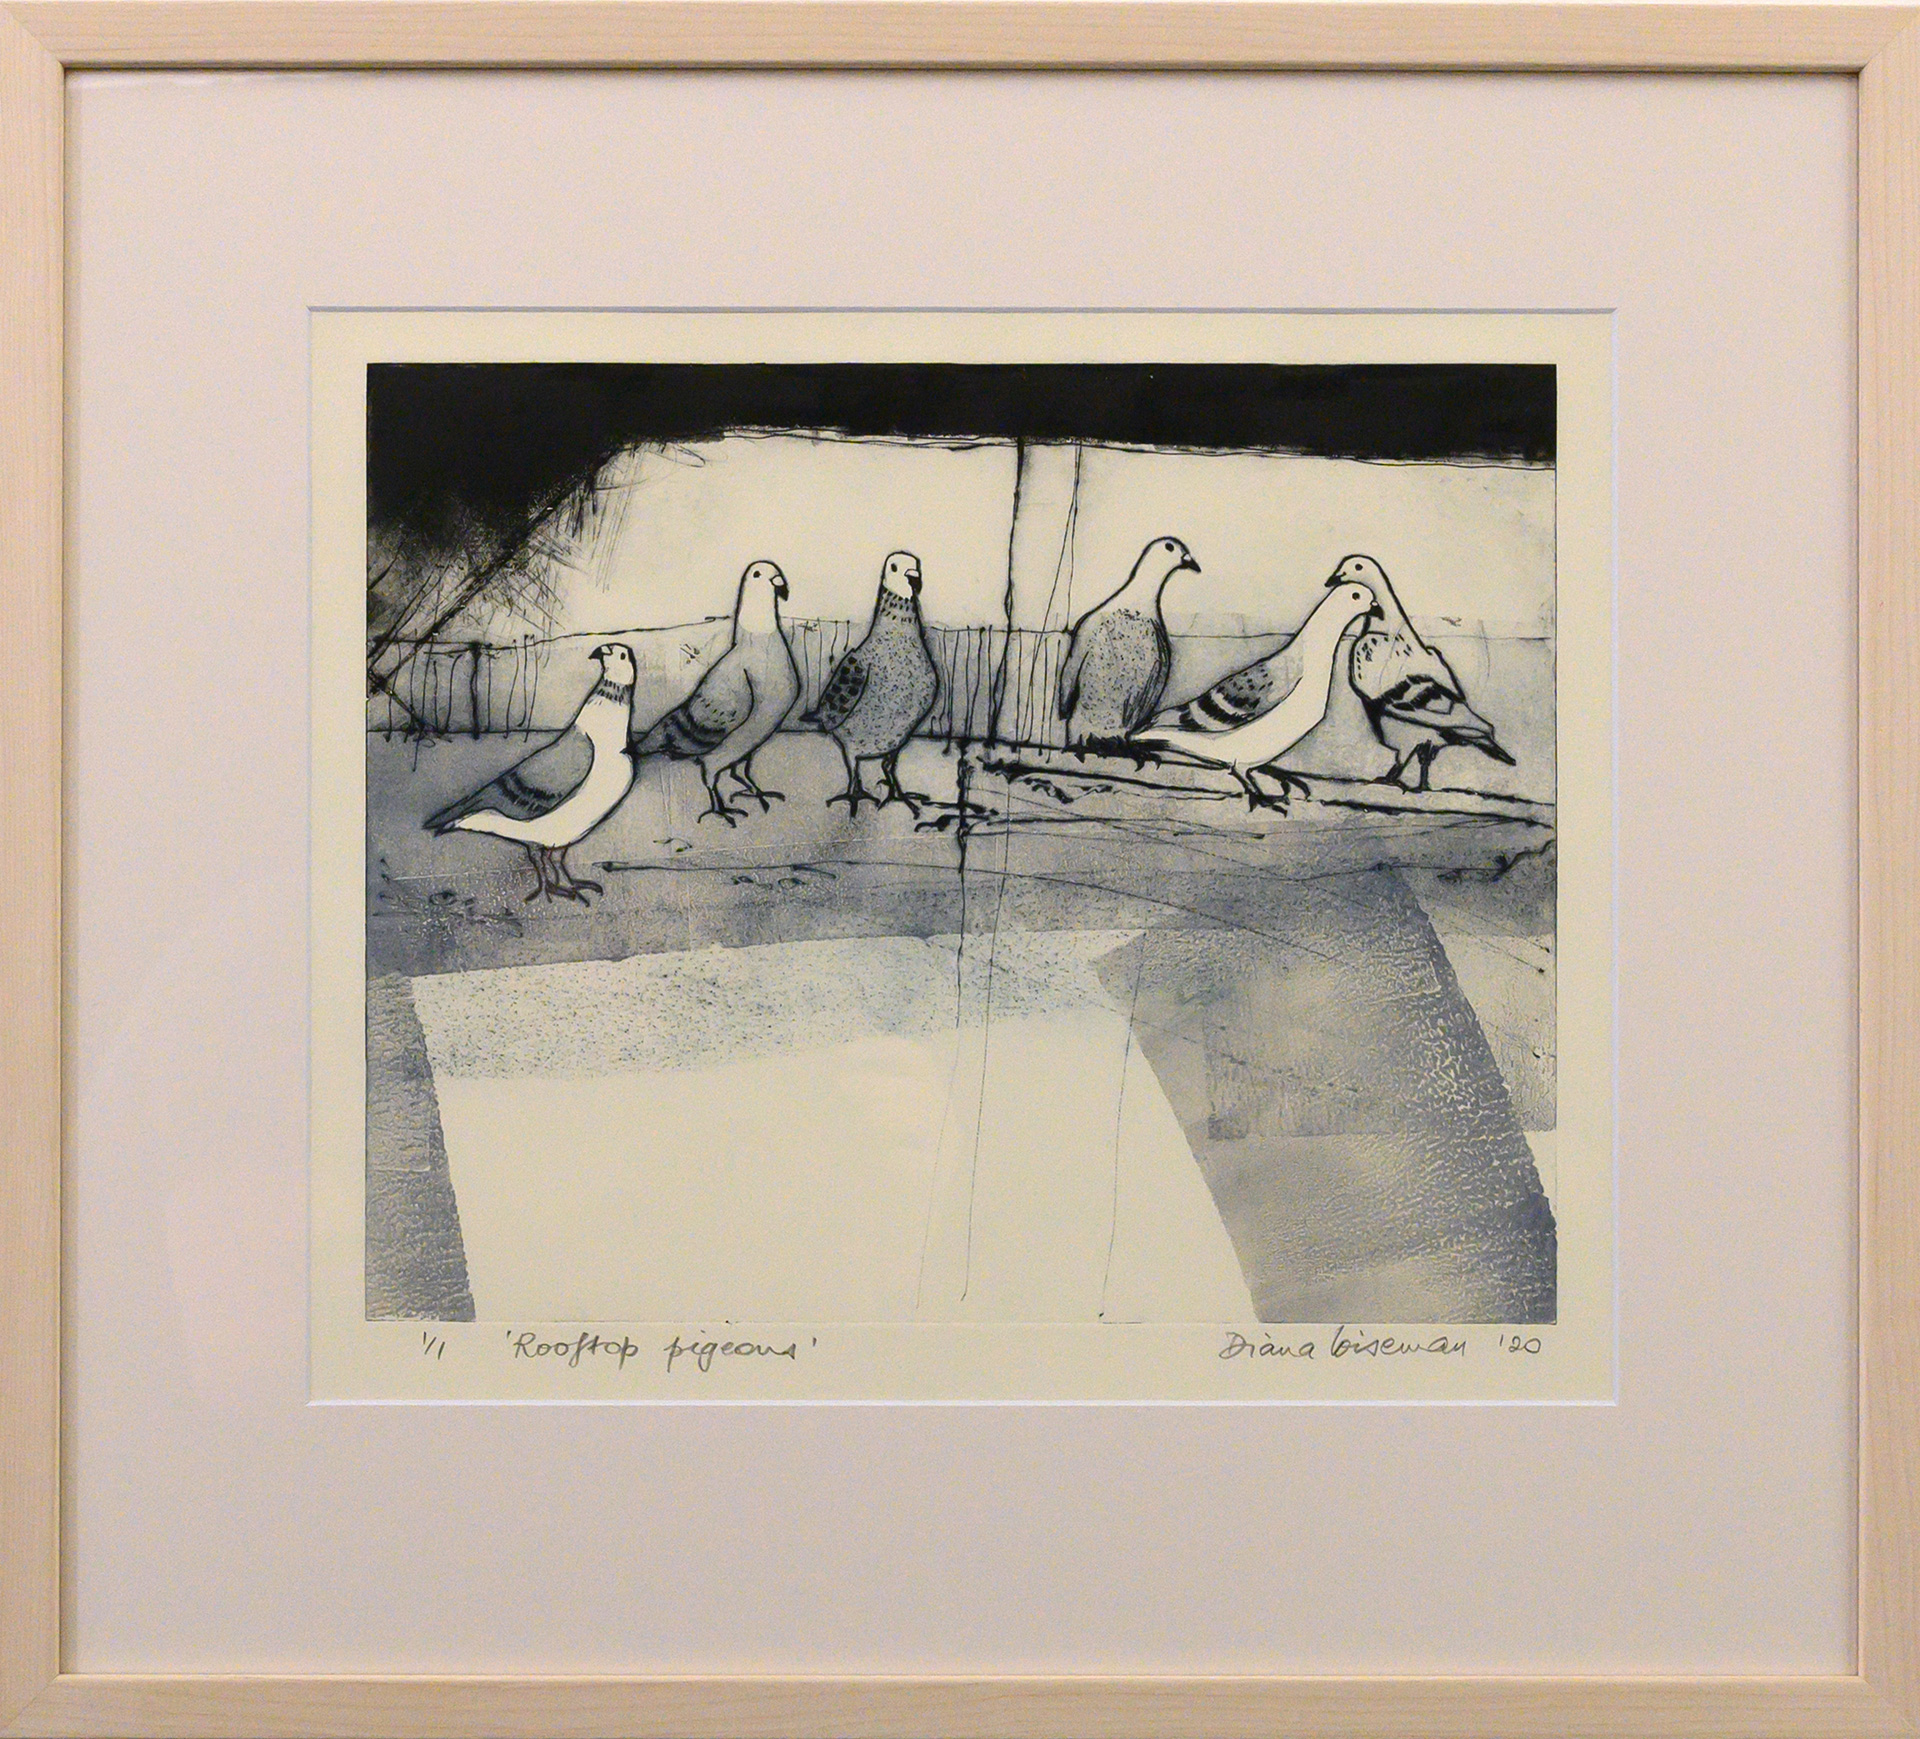 Framed artwork by Diana Wiseman of a group of pigeons